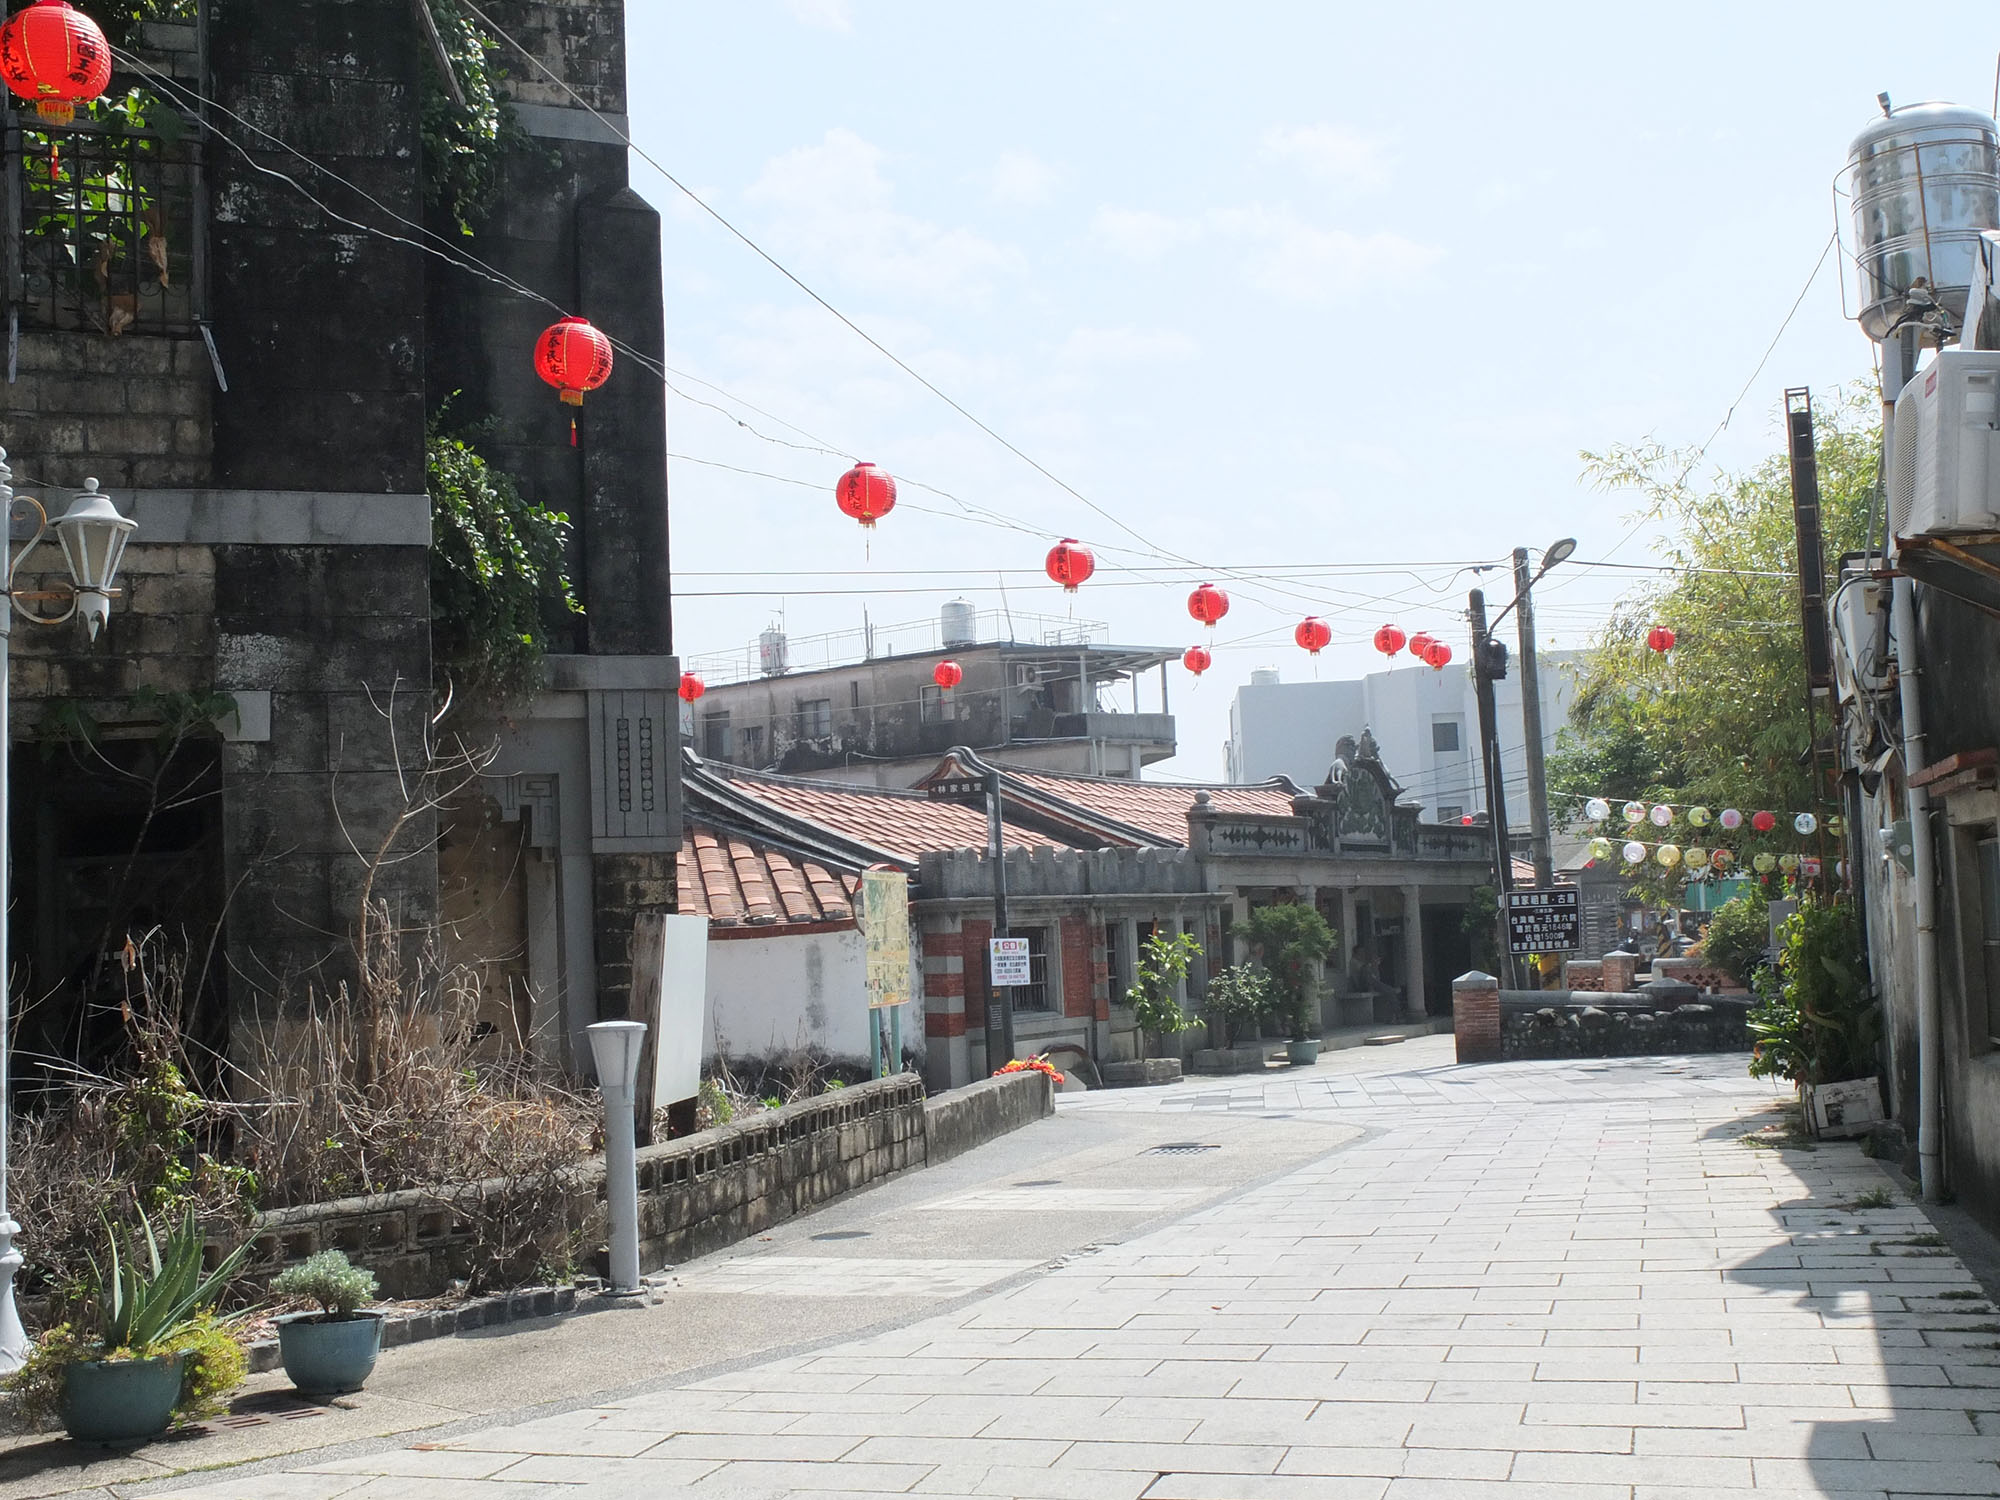 Jiadong's rural streets and alleys are serene and tranquil